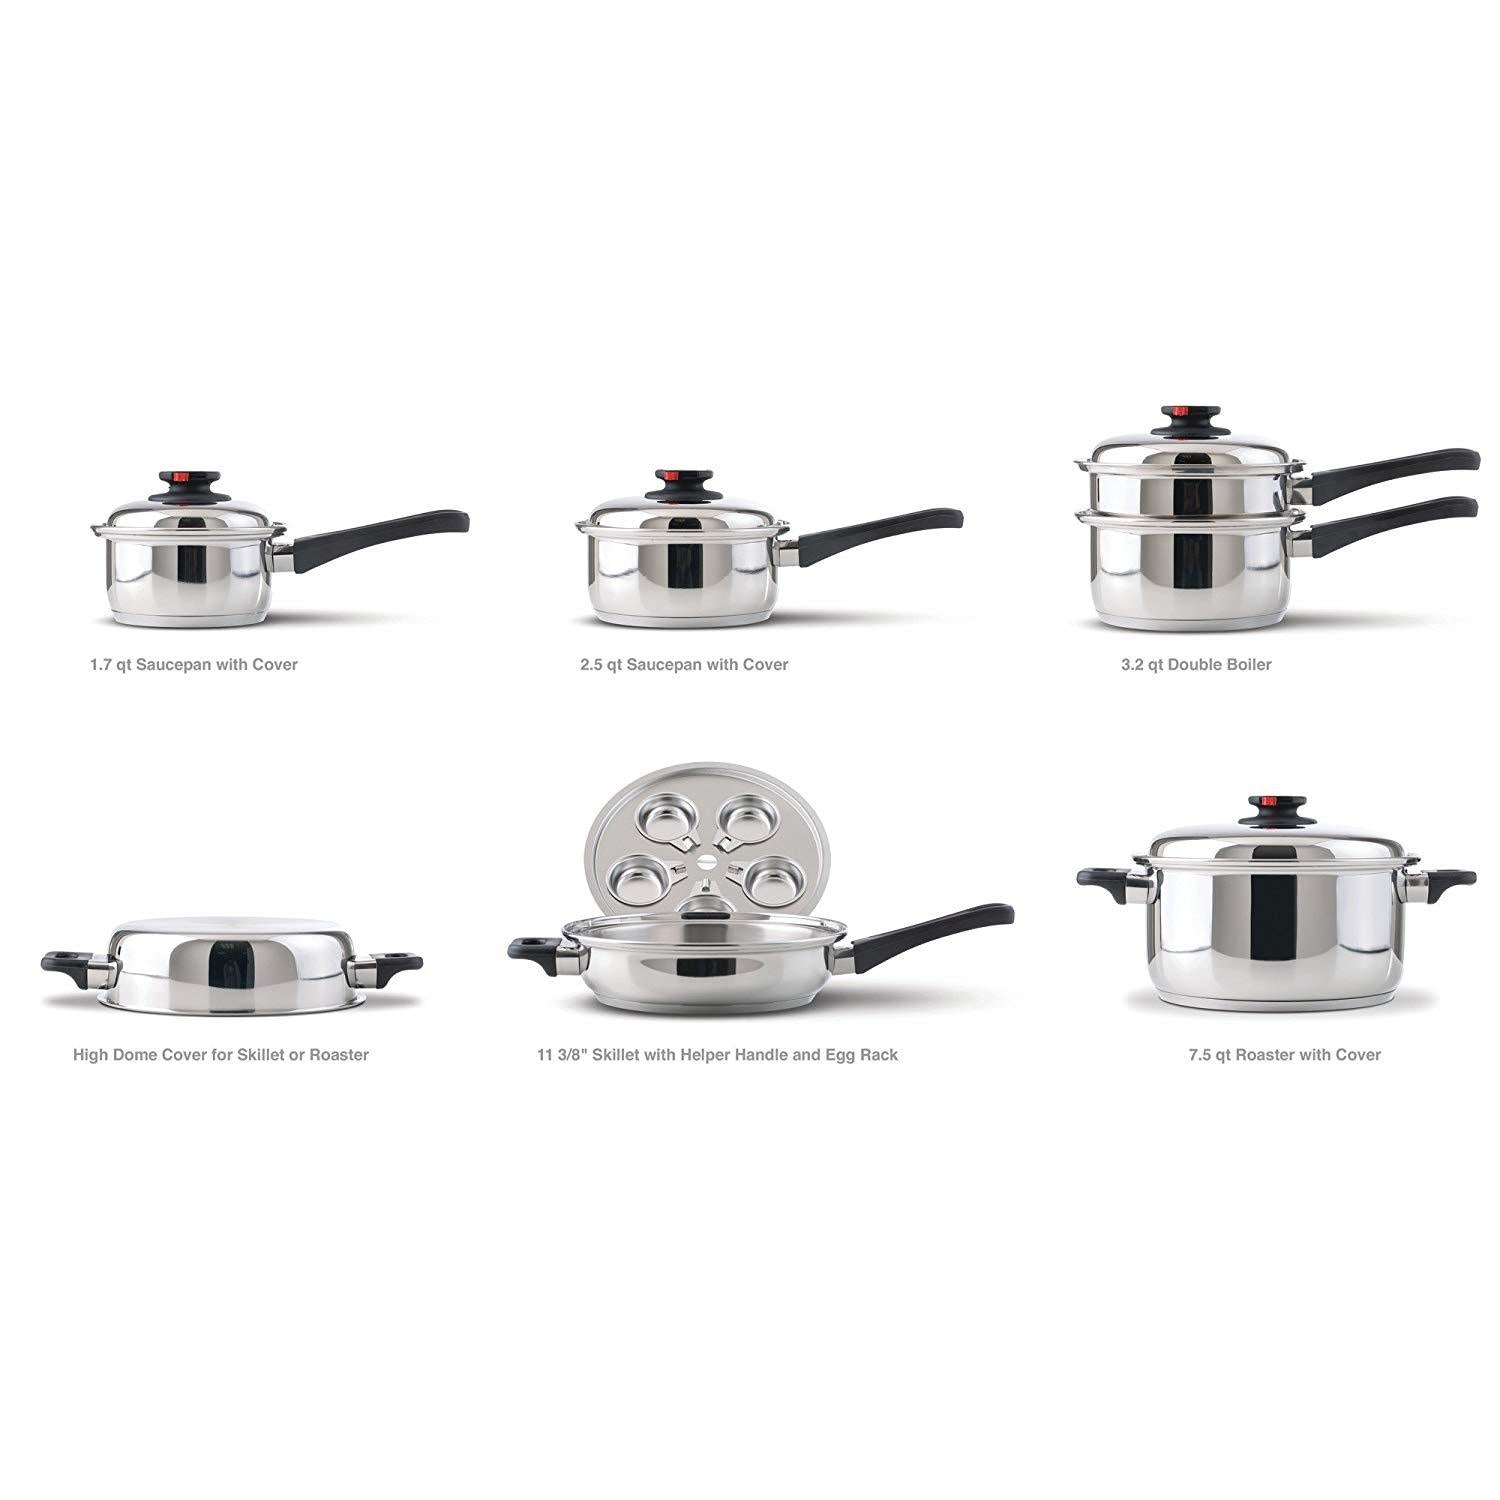  Maxam Waterless Cookware Set, Durable Stainless Steel  Construction with Heat and Cold Resistant Handles, 17-Pieces: Home & Kitchen